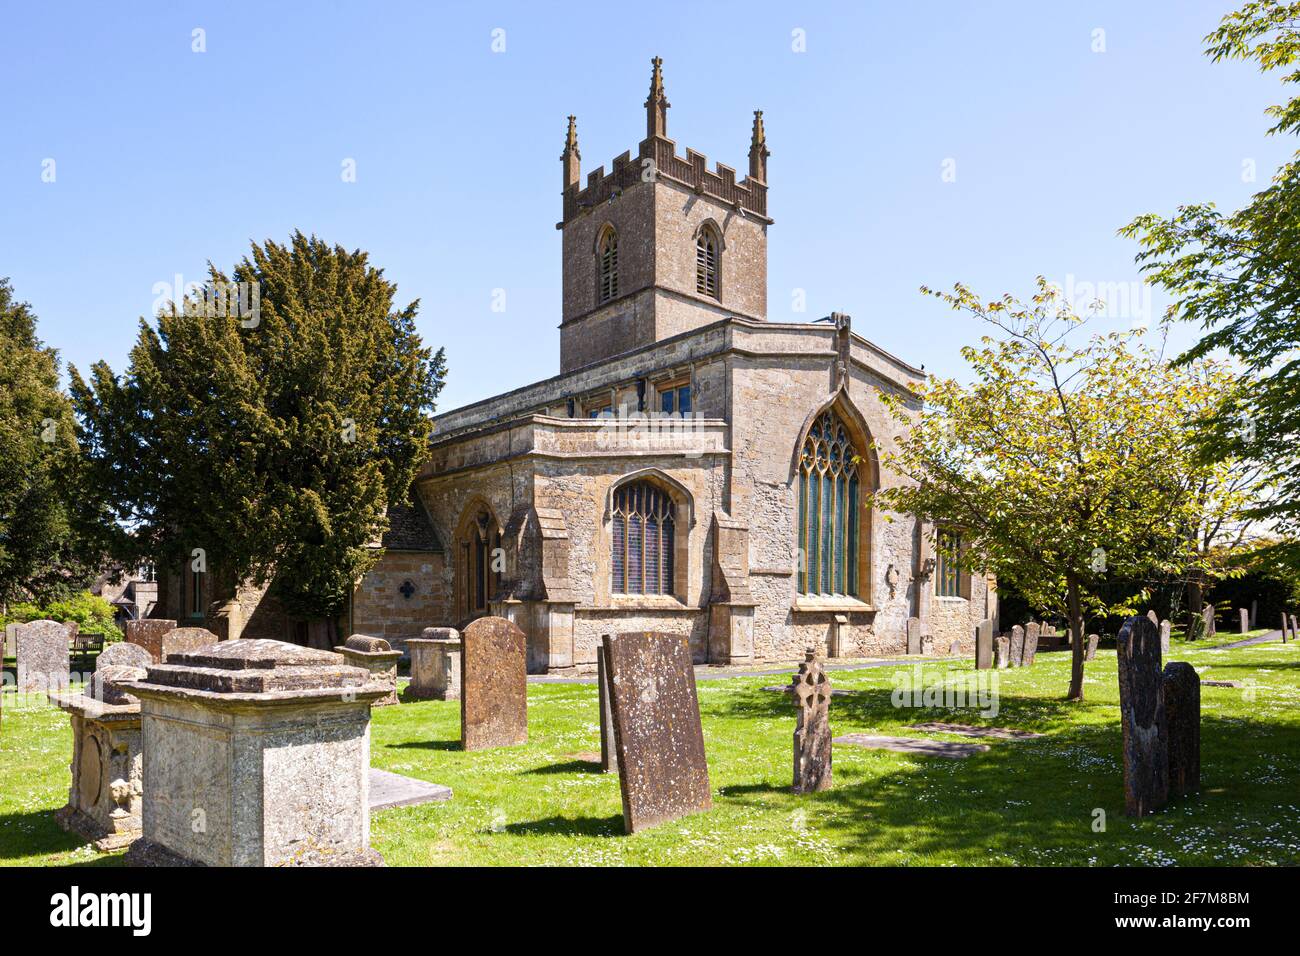 Kirche St. Edwards in den Cotswolds Stadt Stow auf die würde, Gloucestershire UK Stockfoto